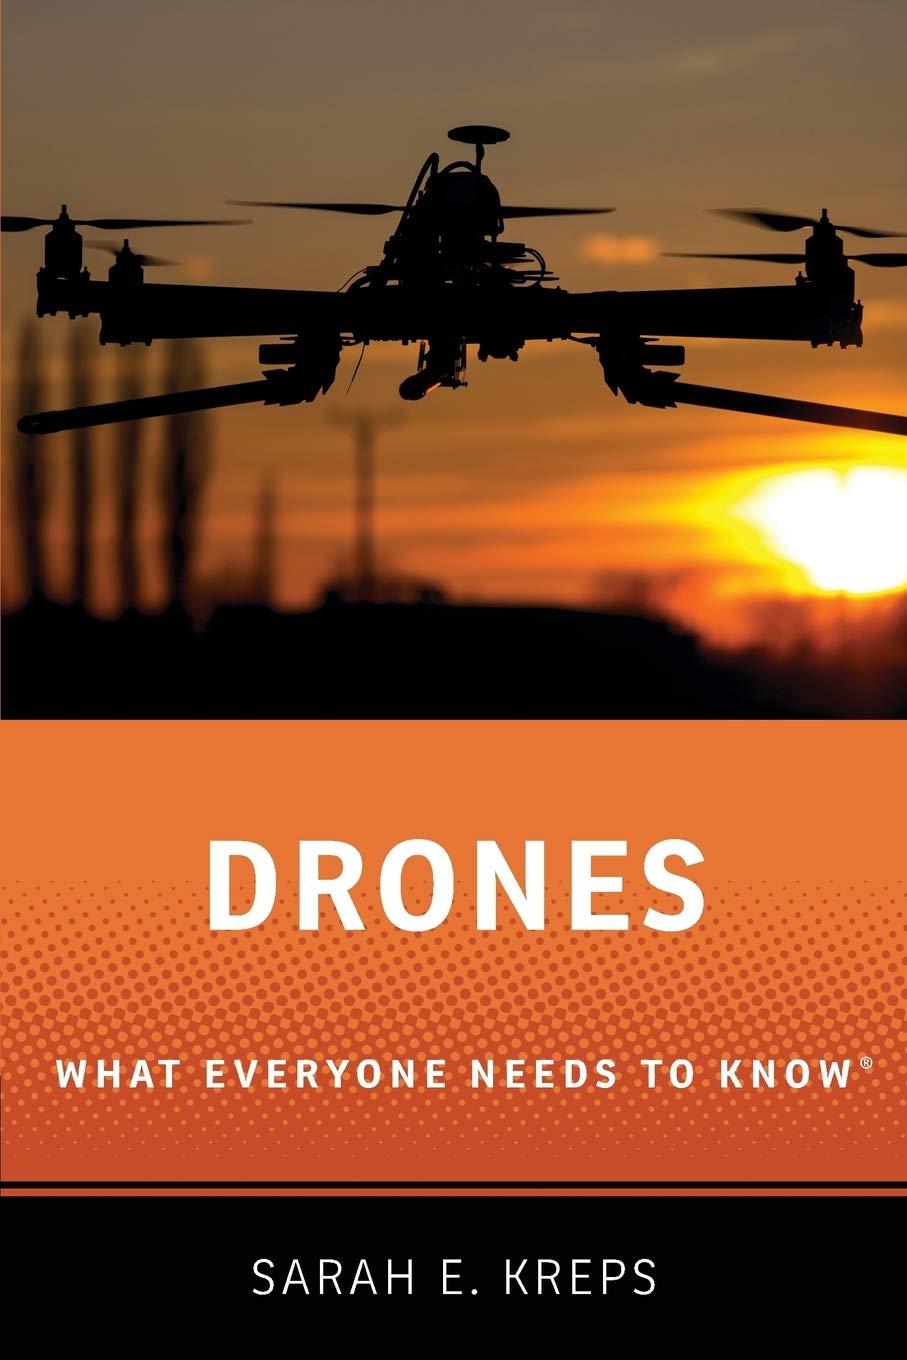 drones what everyone needs to know®